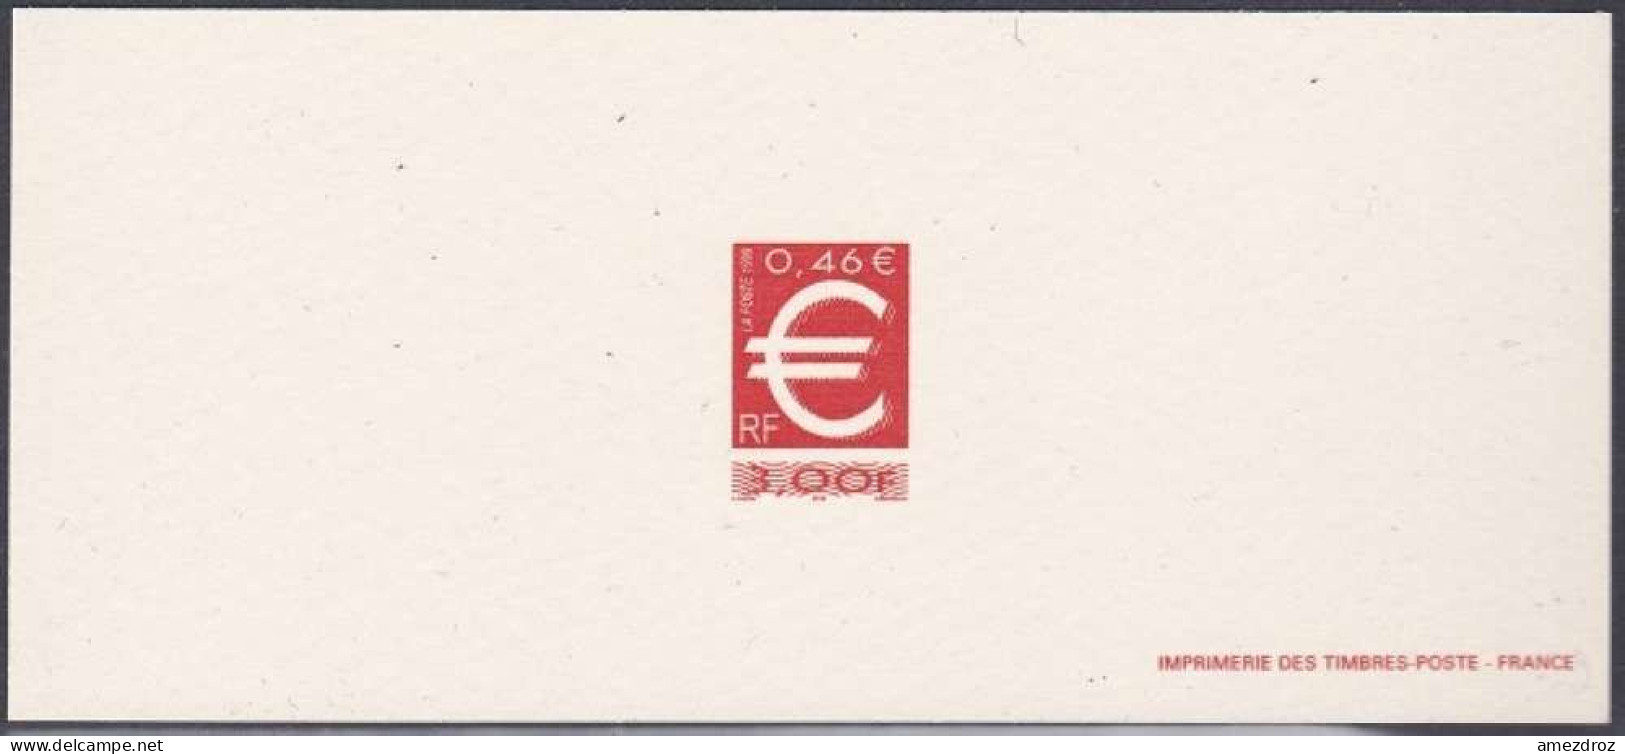 France Gravure Officielle 1999 Euro (3) - Documents Of Postal Services